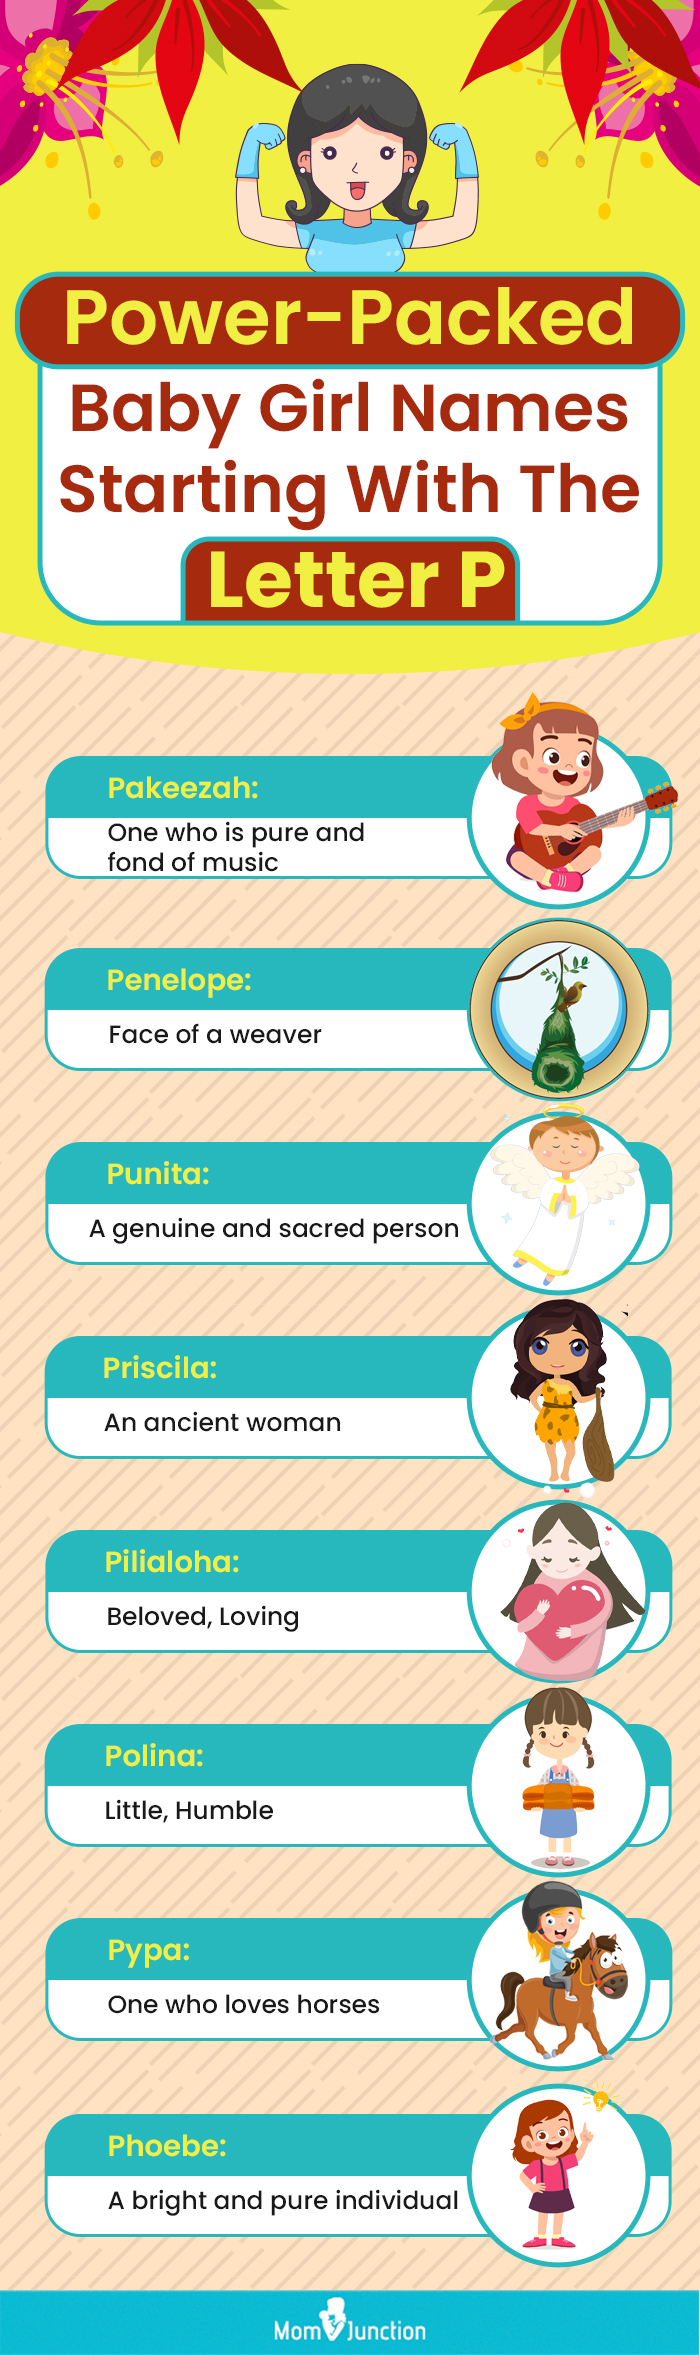 power packed baby girl names starting with the letter p (infographic)